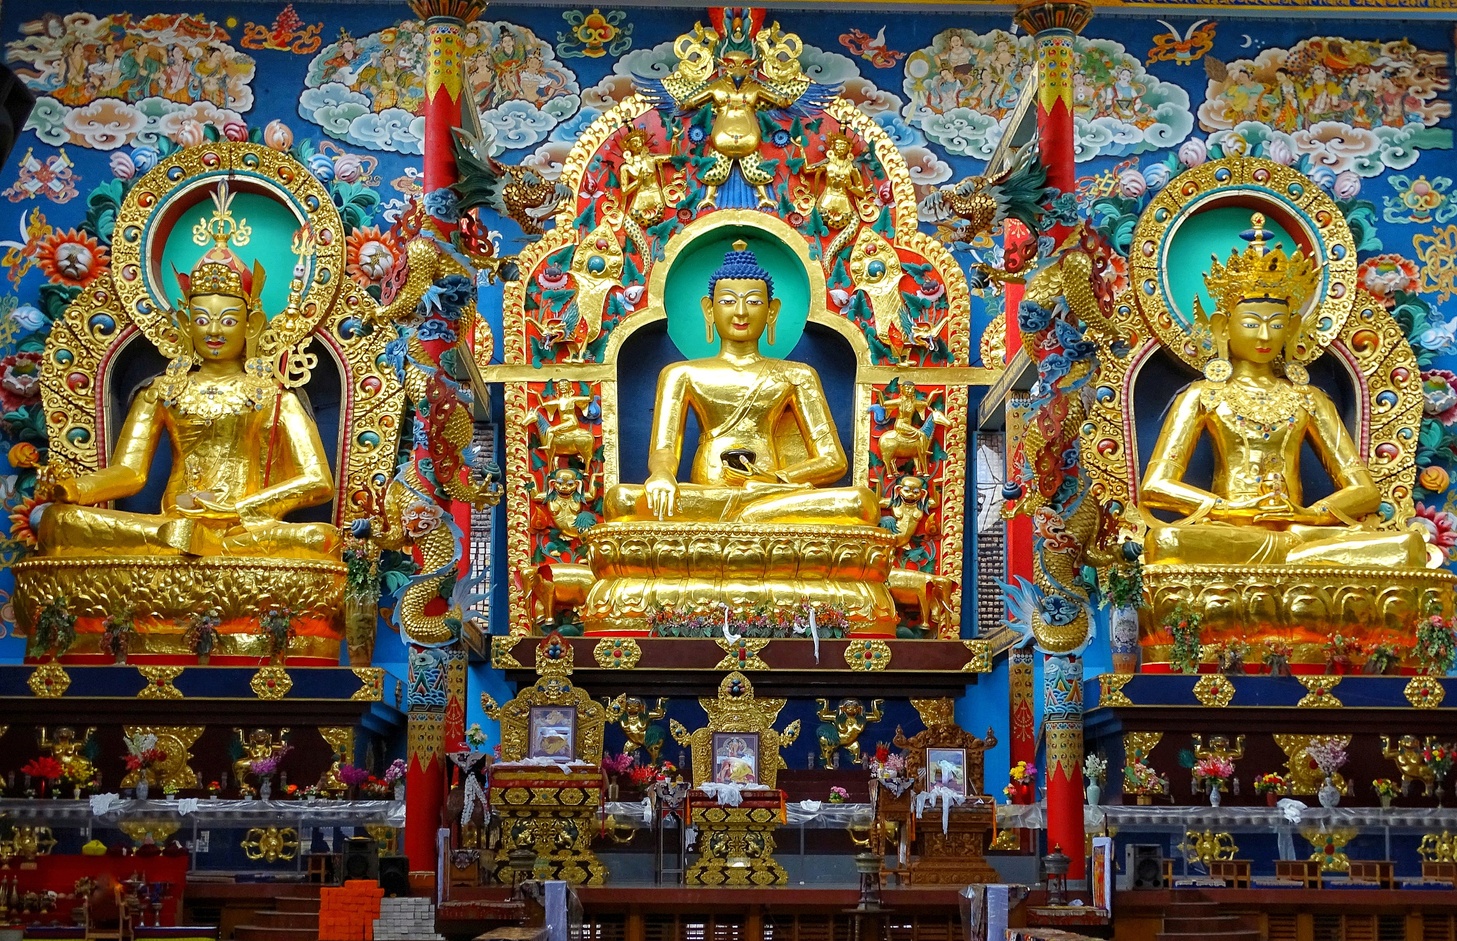 Buddha's Statue in Buddhist Golden Temple, Coorg